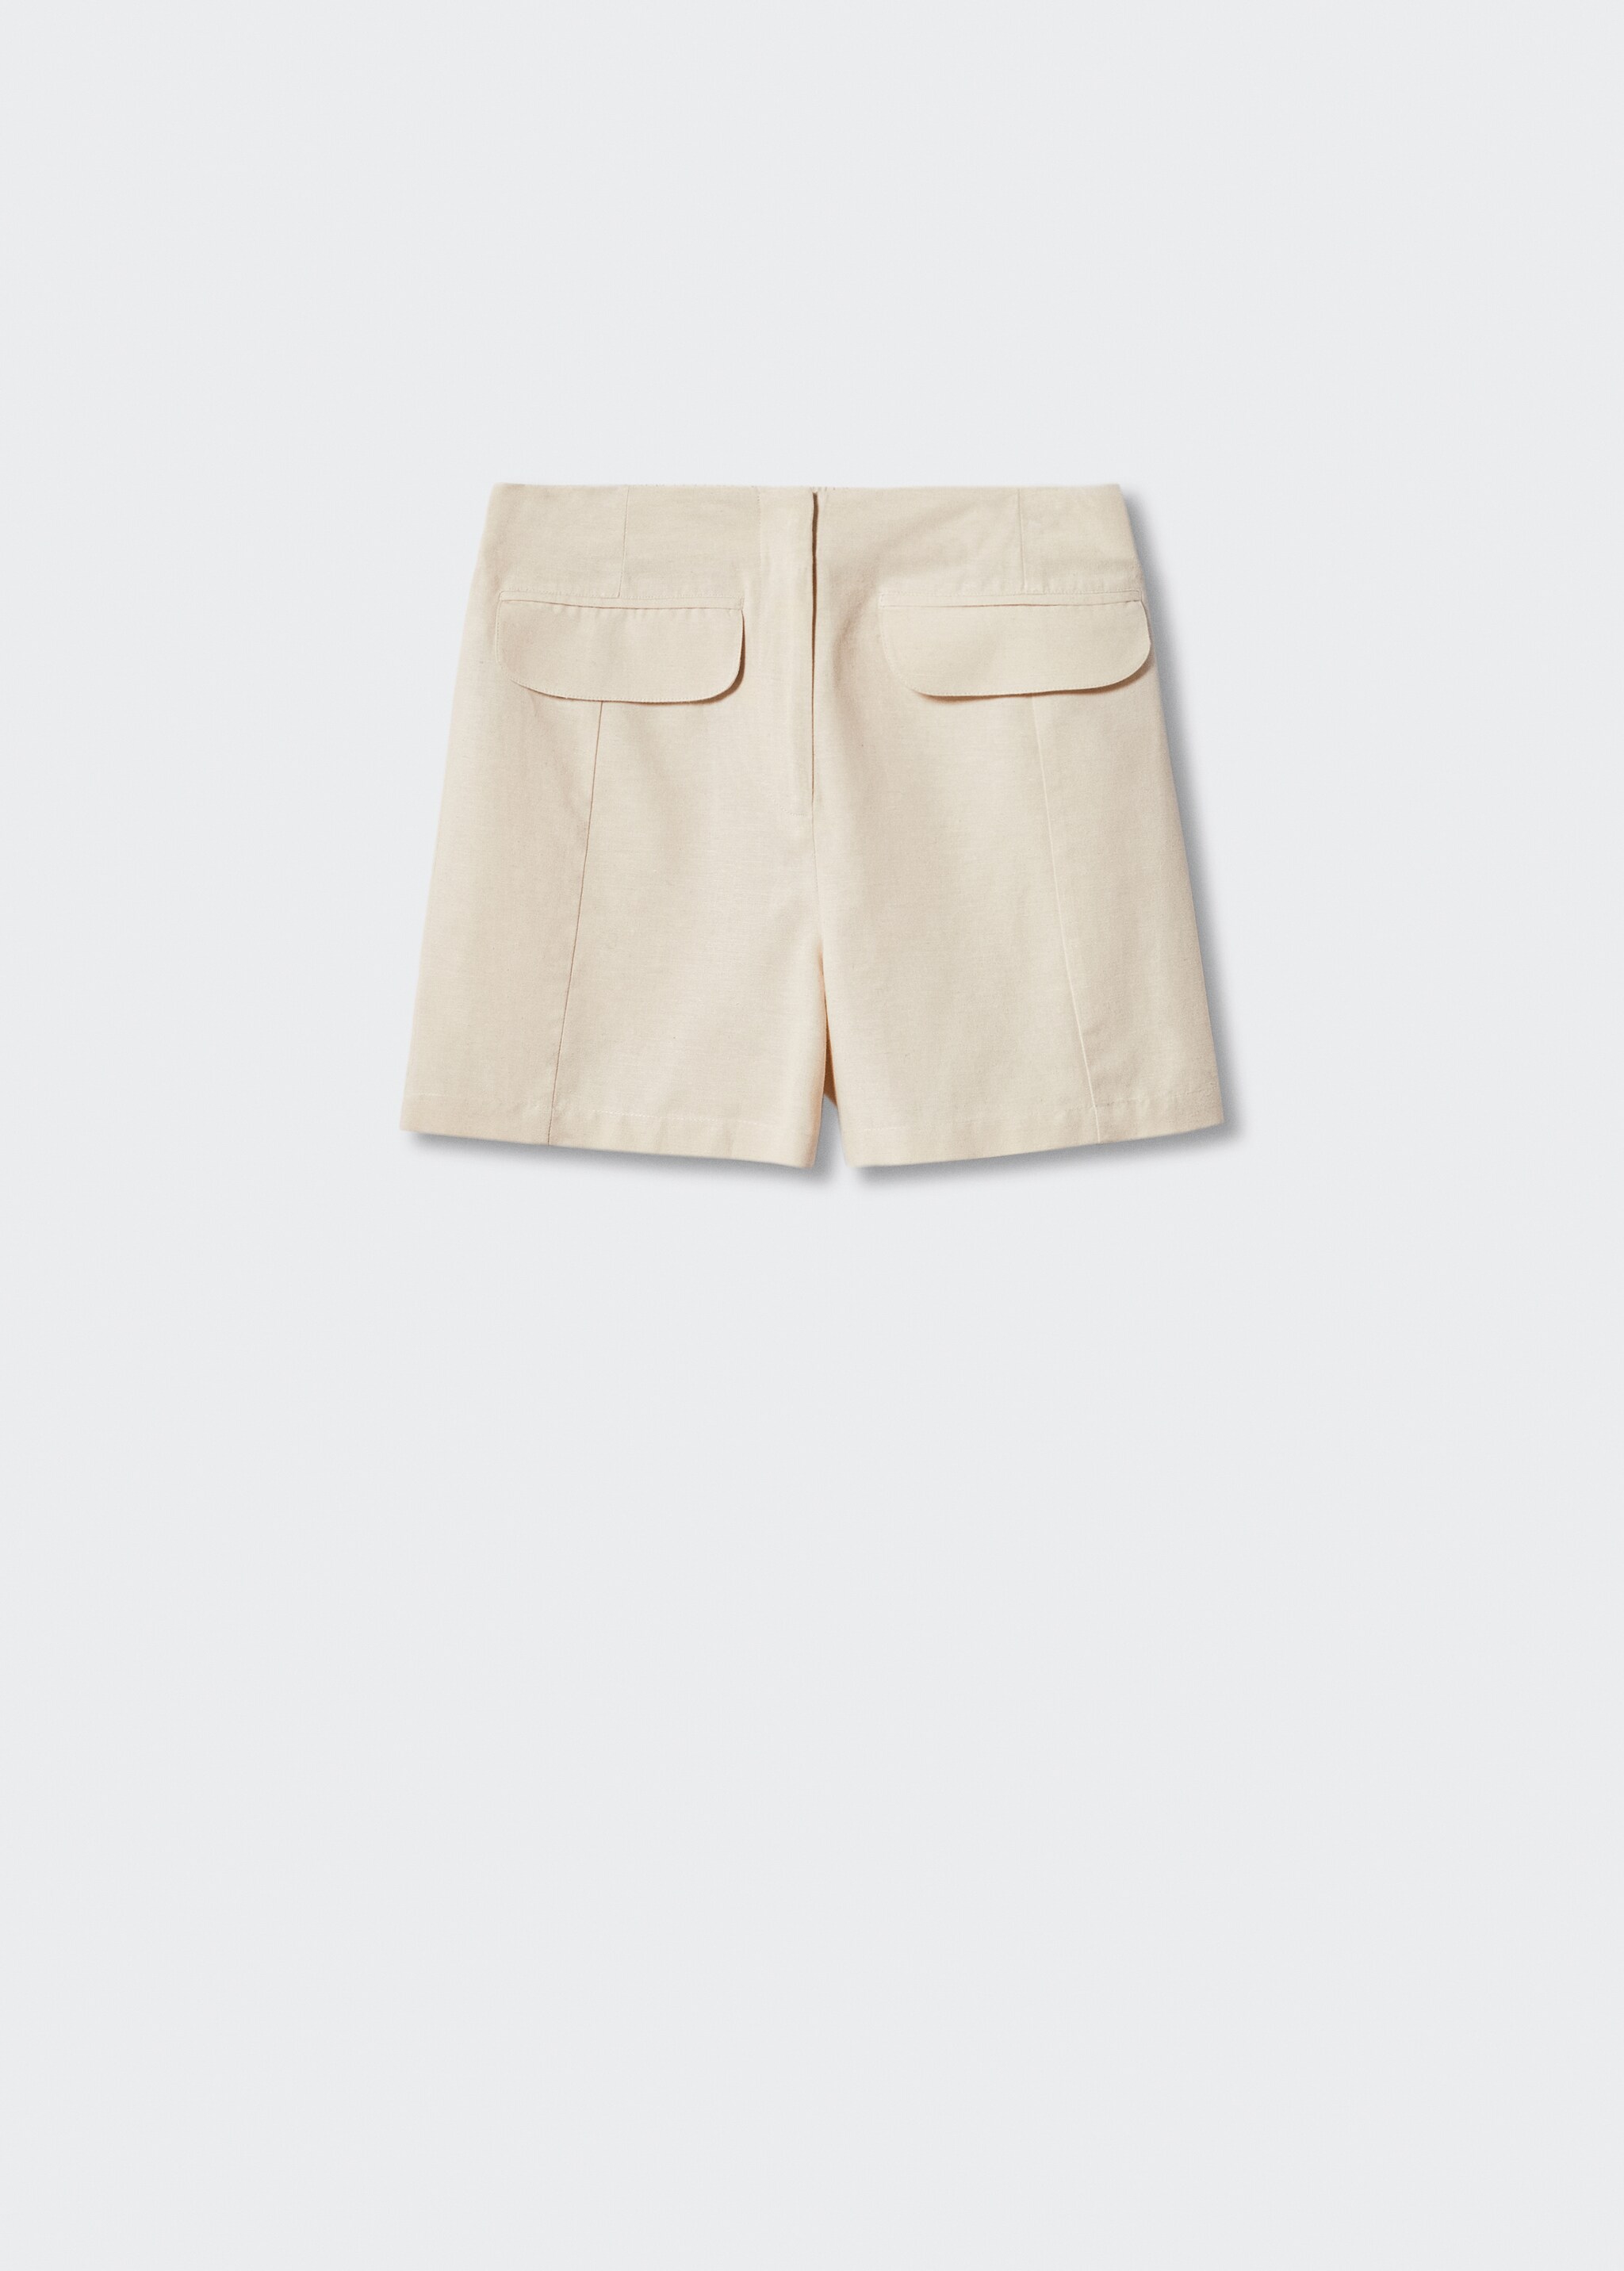 Linen shorts with pockets - Article without model